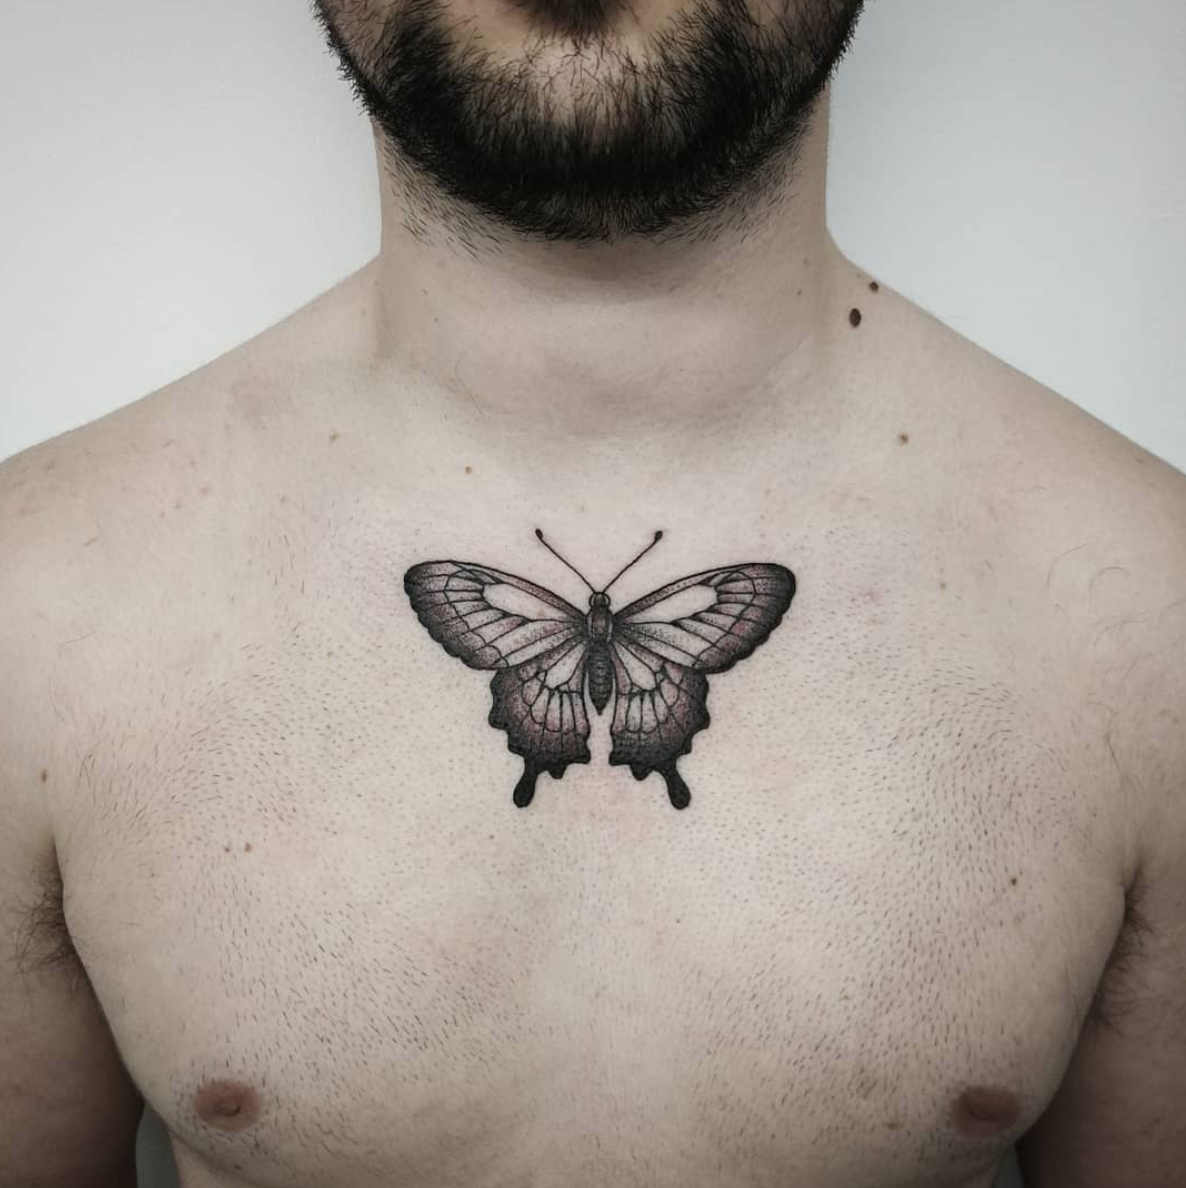 Butterfly Tattoo Designs For Men * Arm Tattoo Sites.